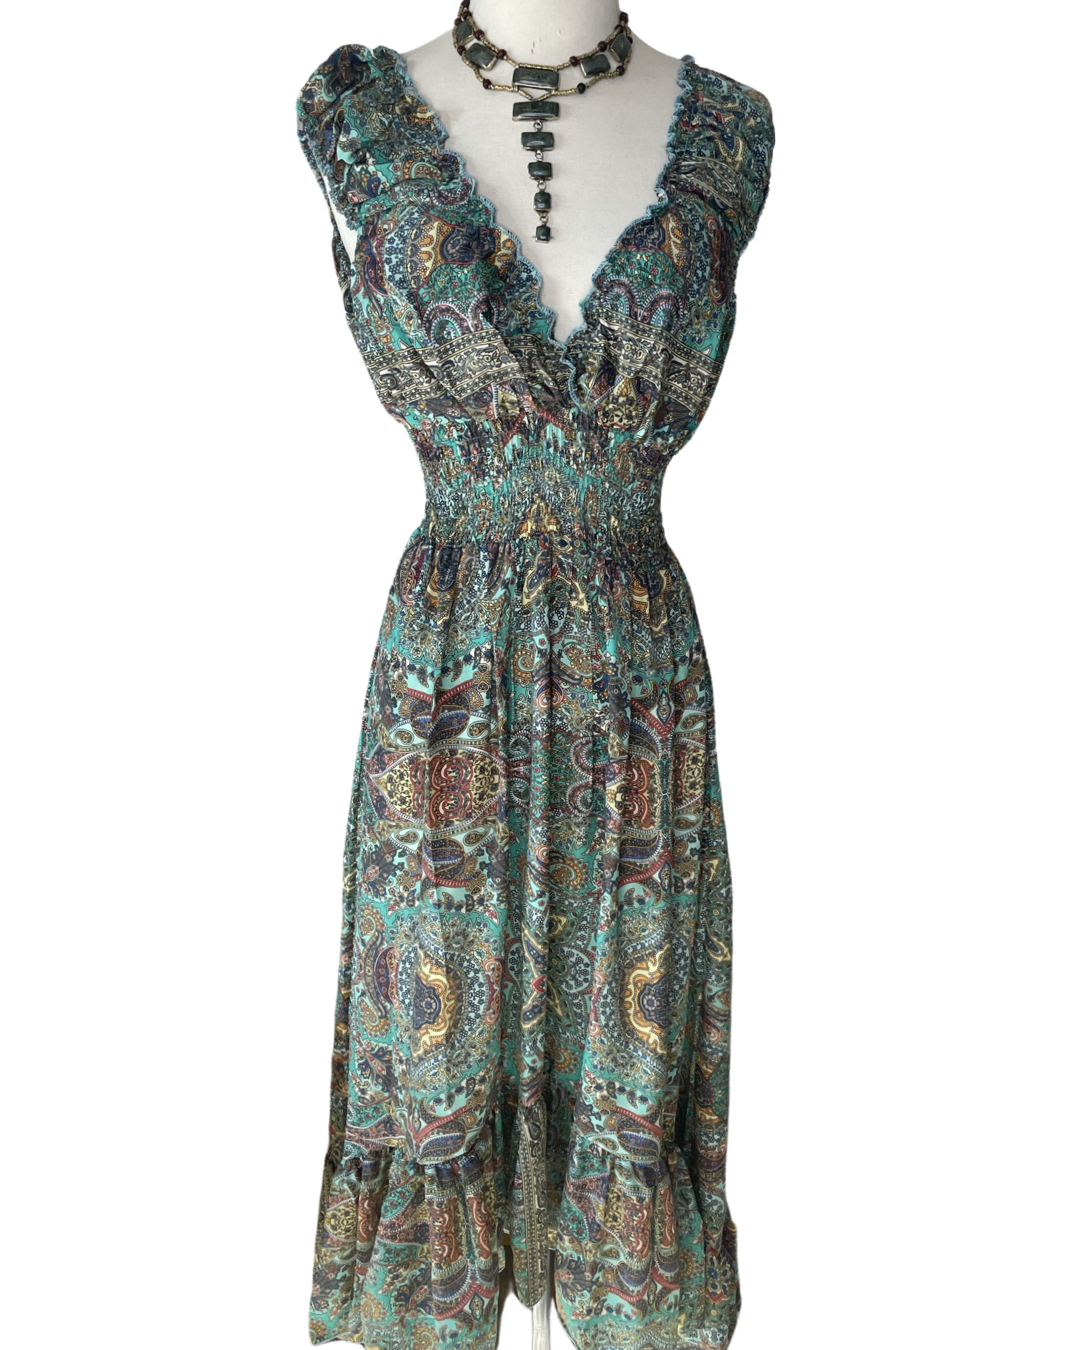 Bohemian High and Low Silk Ruffle Dress  (Green) - Coco and lulu boutique 